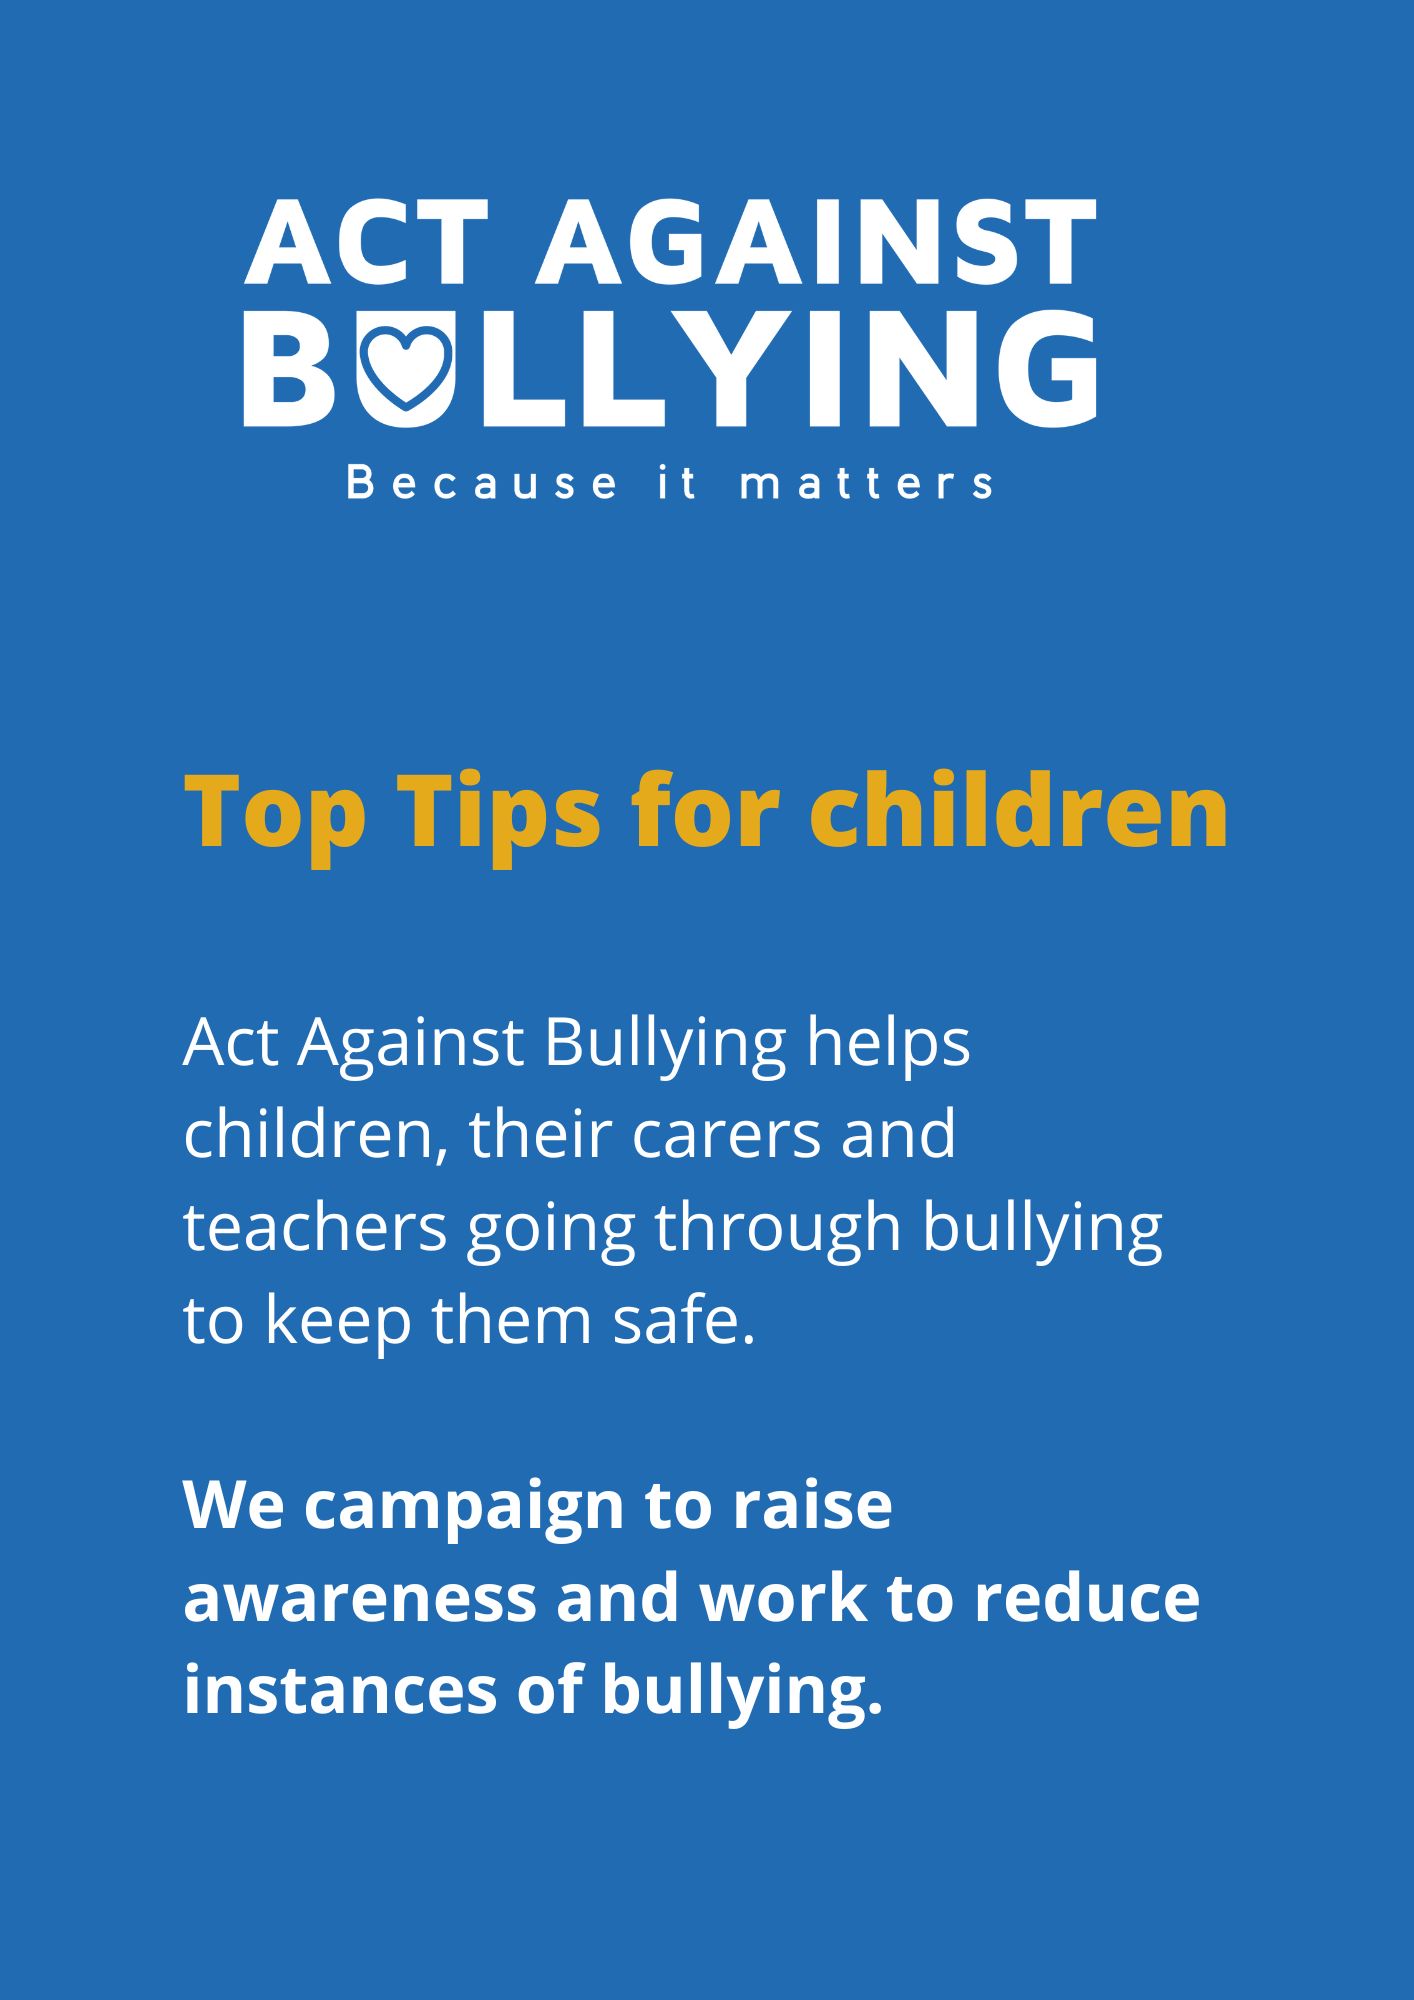 Copy of Act Against Bullying Front Leaflet